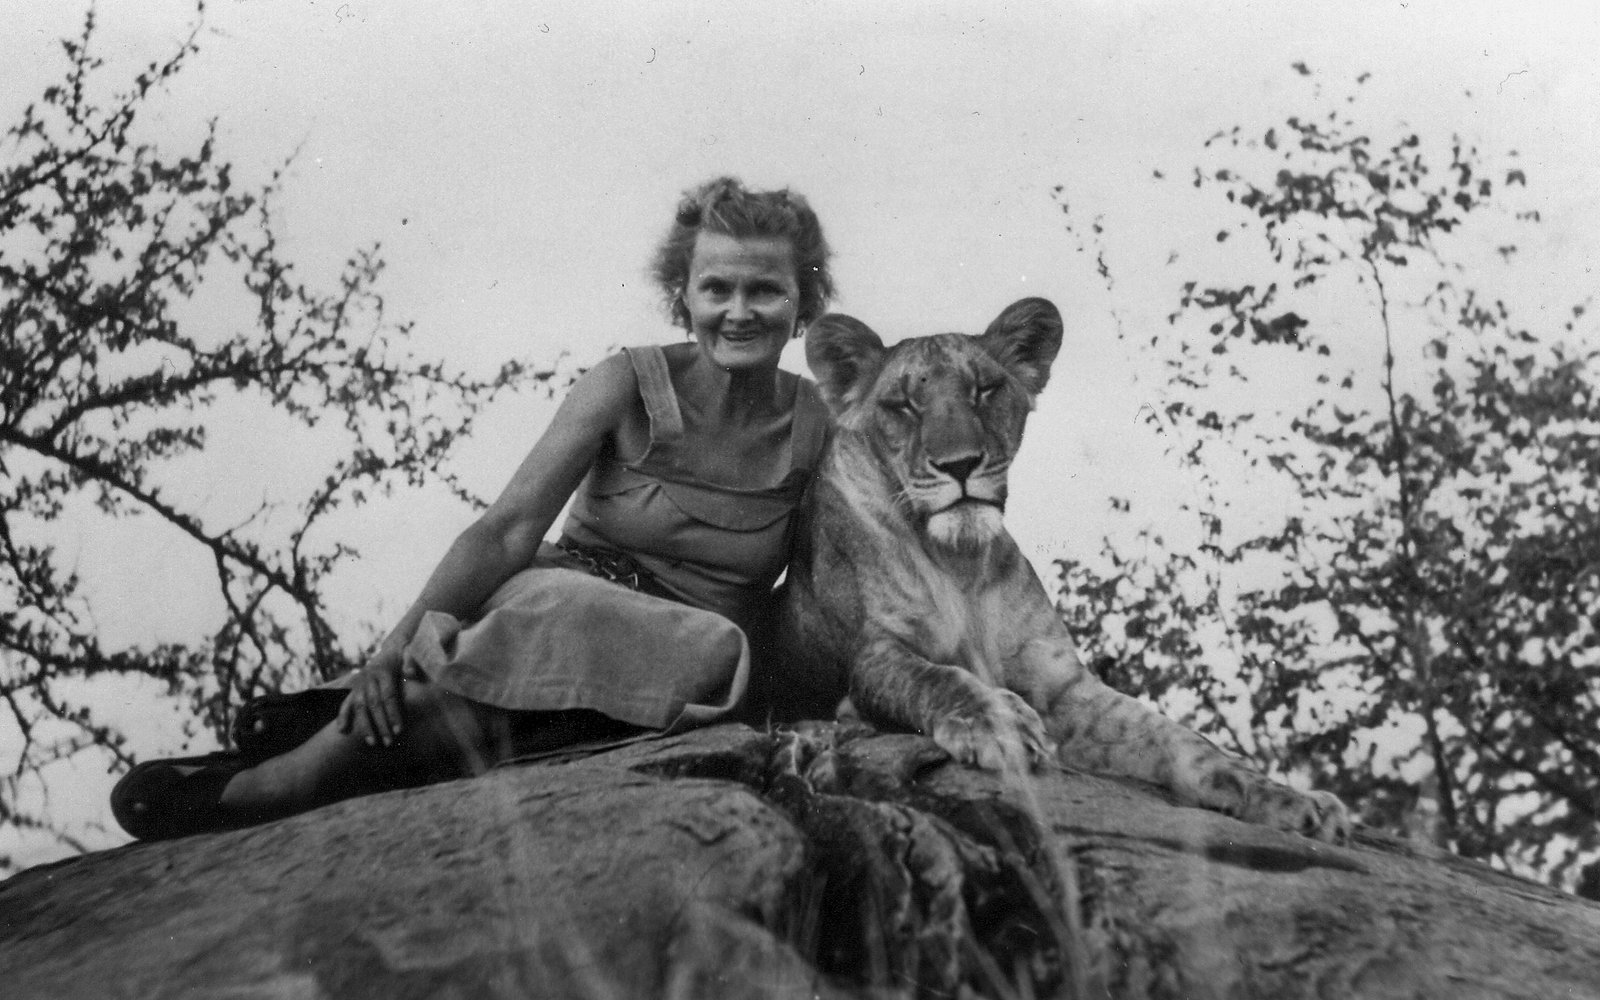 Burial site of Joy Adamson and Elsa the lioness